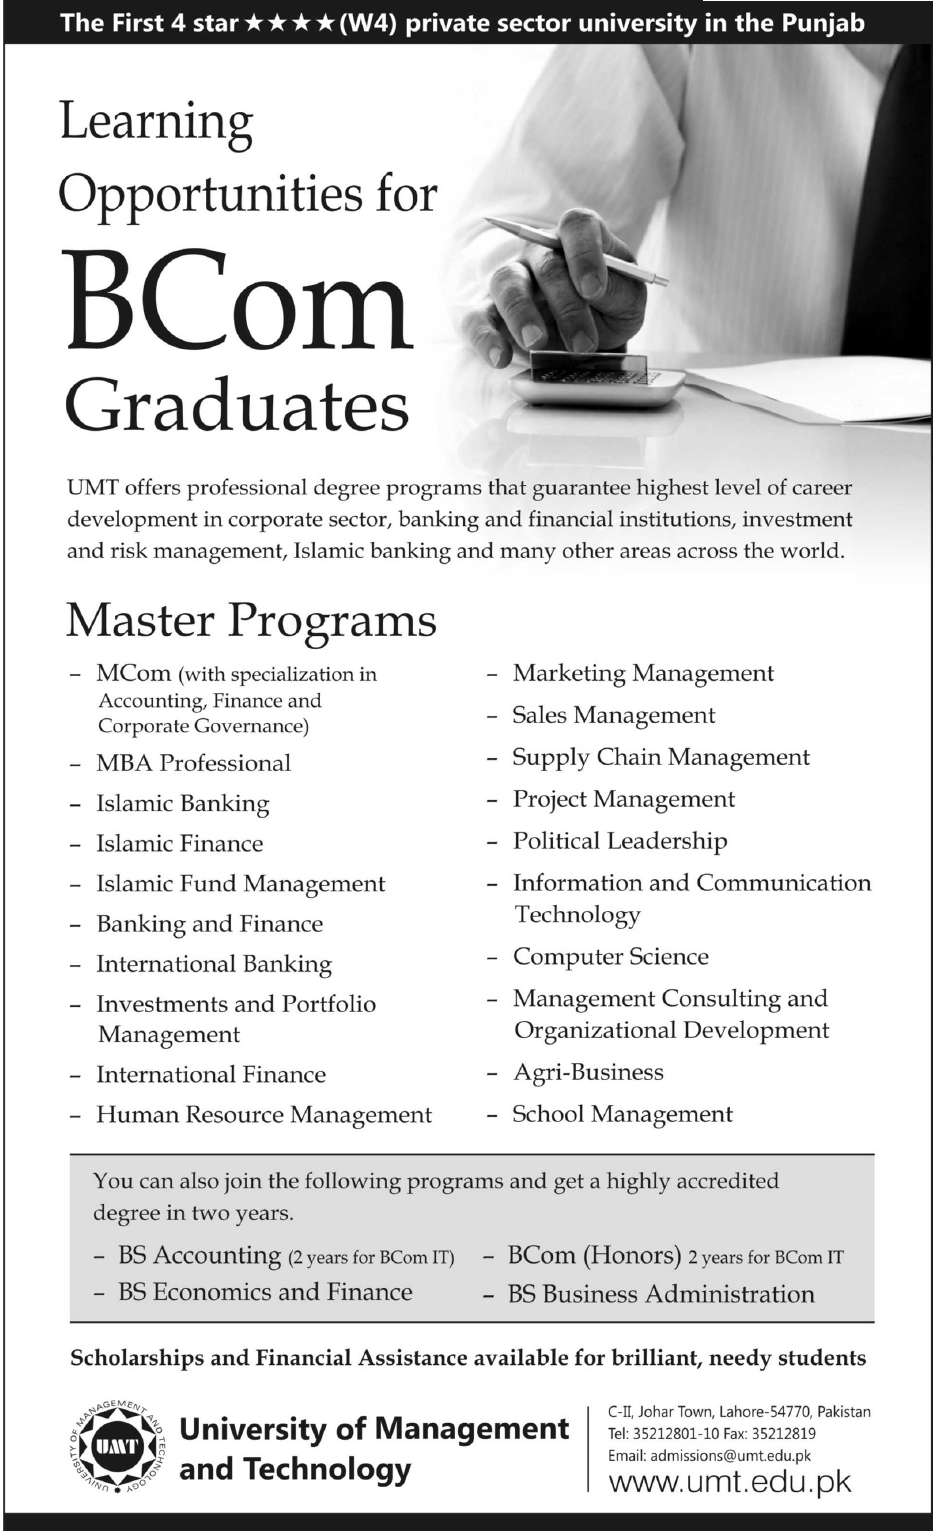 Umt Lahore Learning Opportunities For B.com Graduates 2012